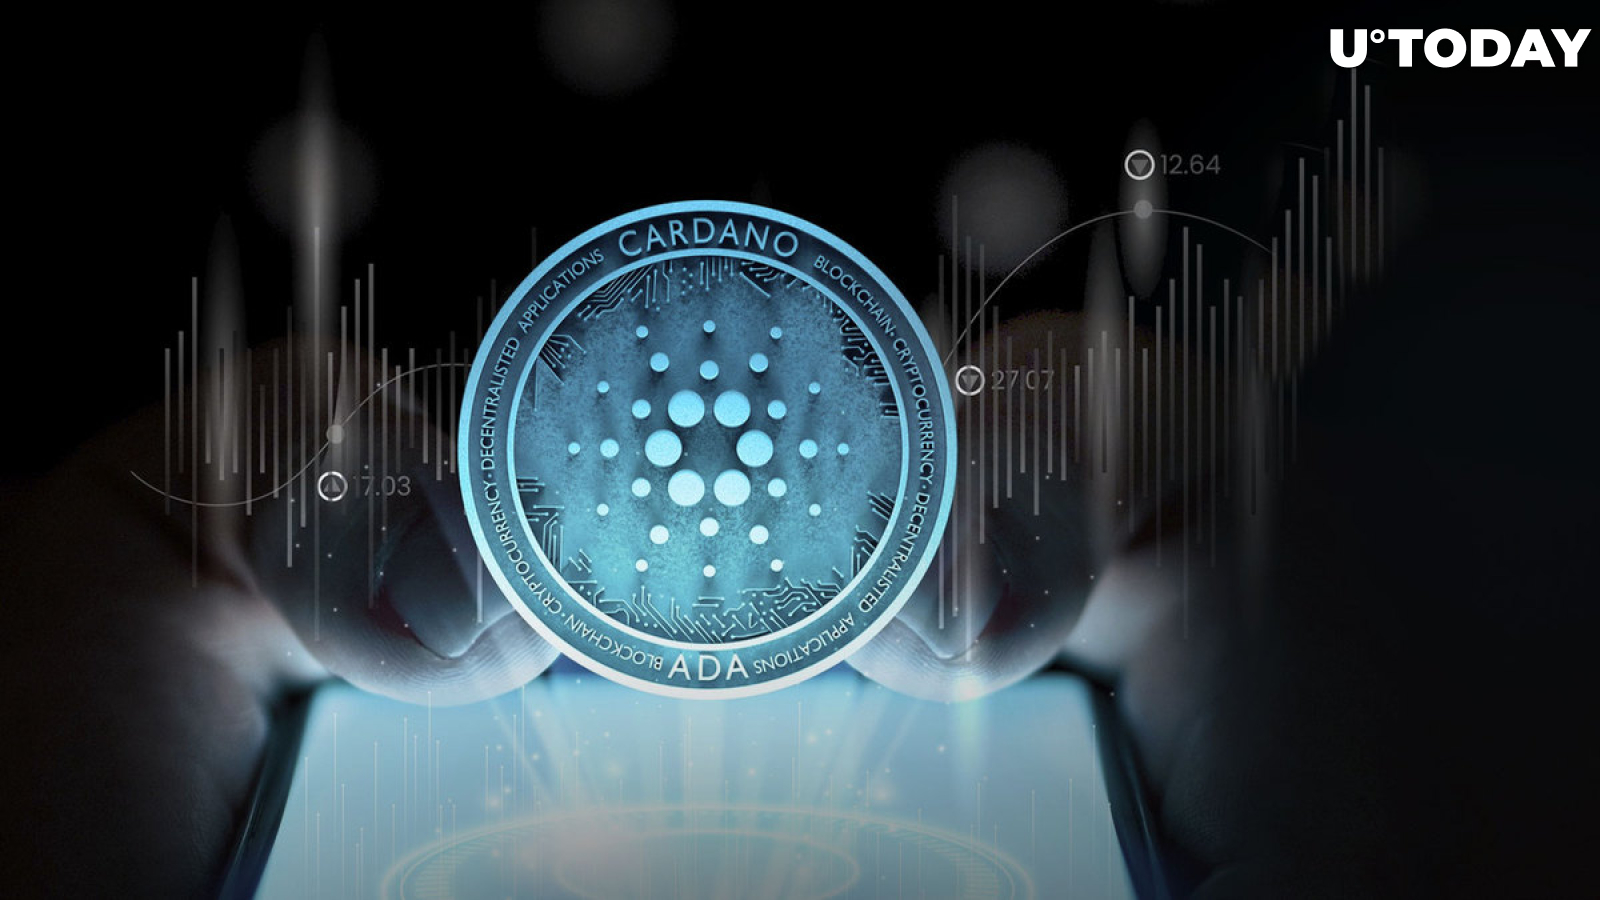 Cardano Records Impressive Growth in April With Over 65 Million Transactions